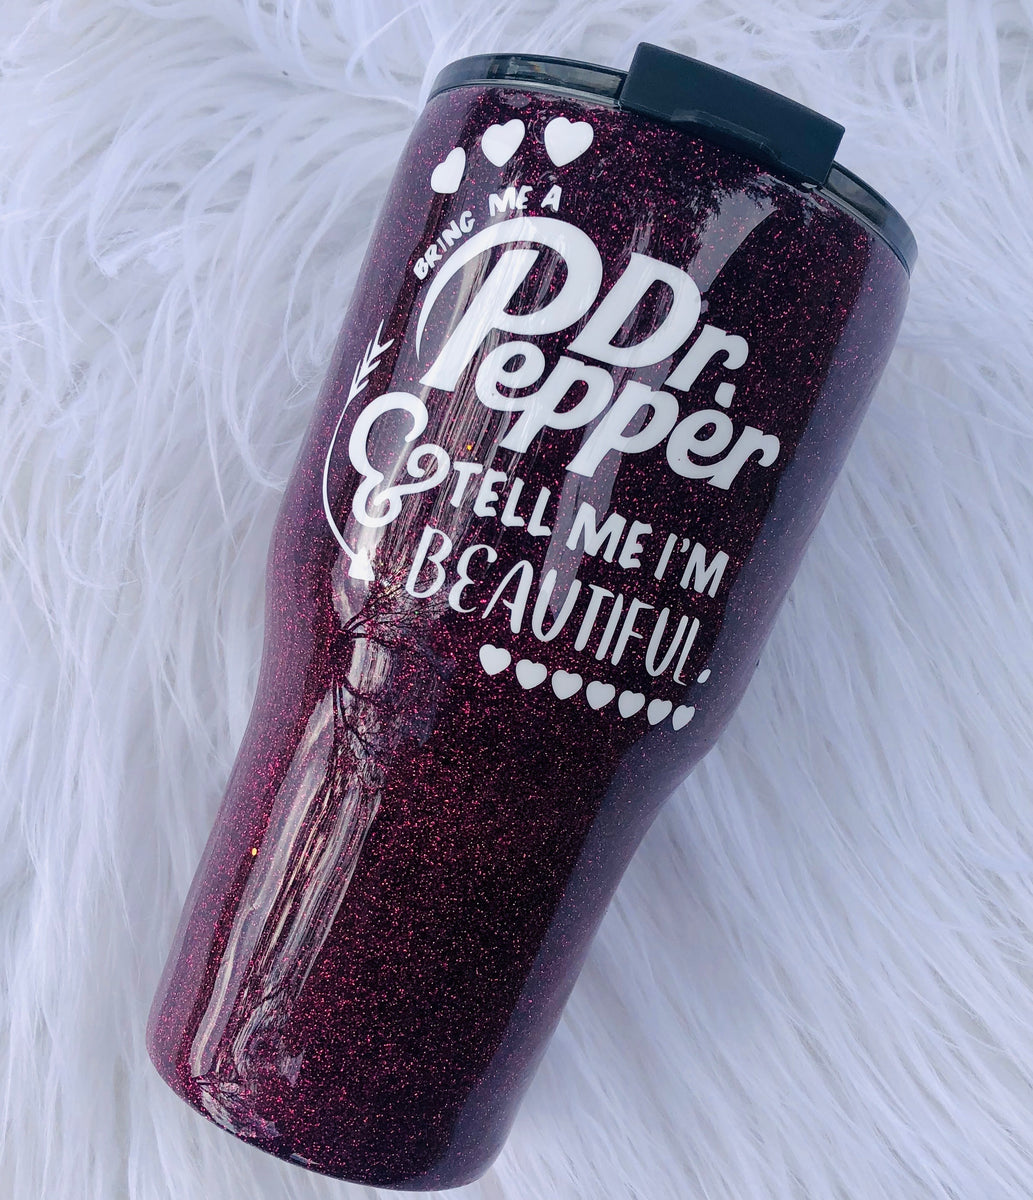 Another beautiful Dr. Pepper tumbler. Just love this color of